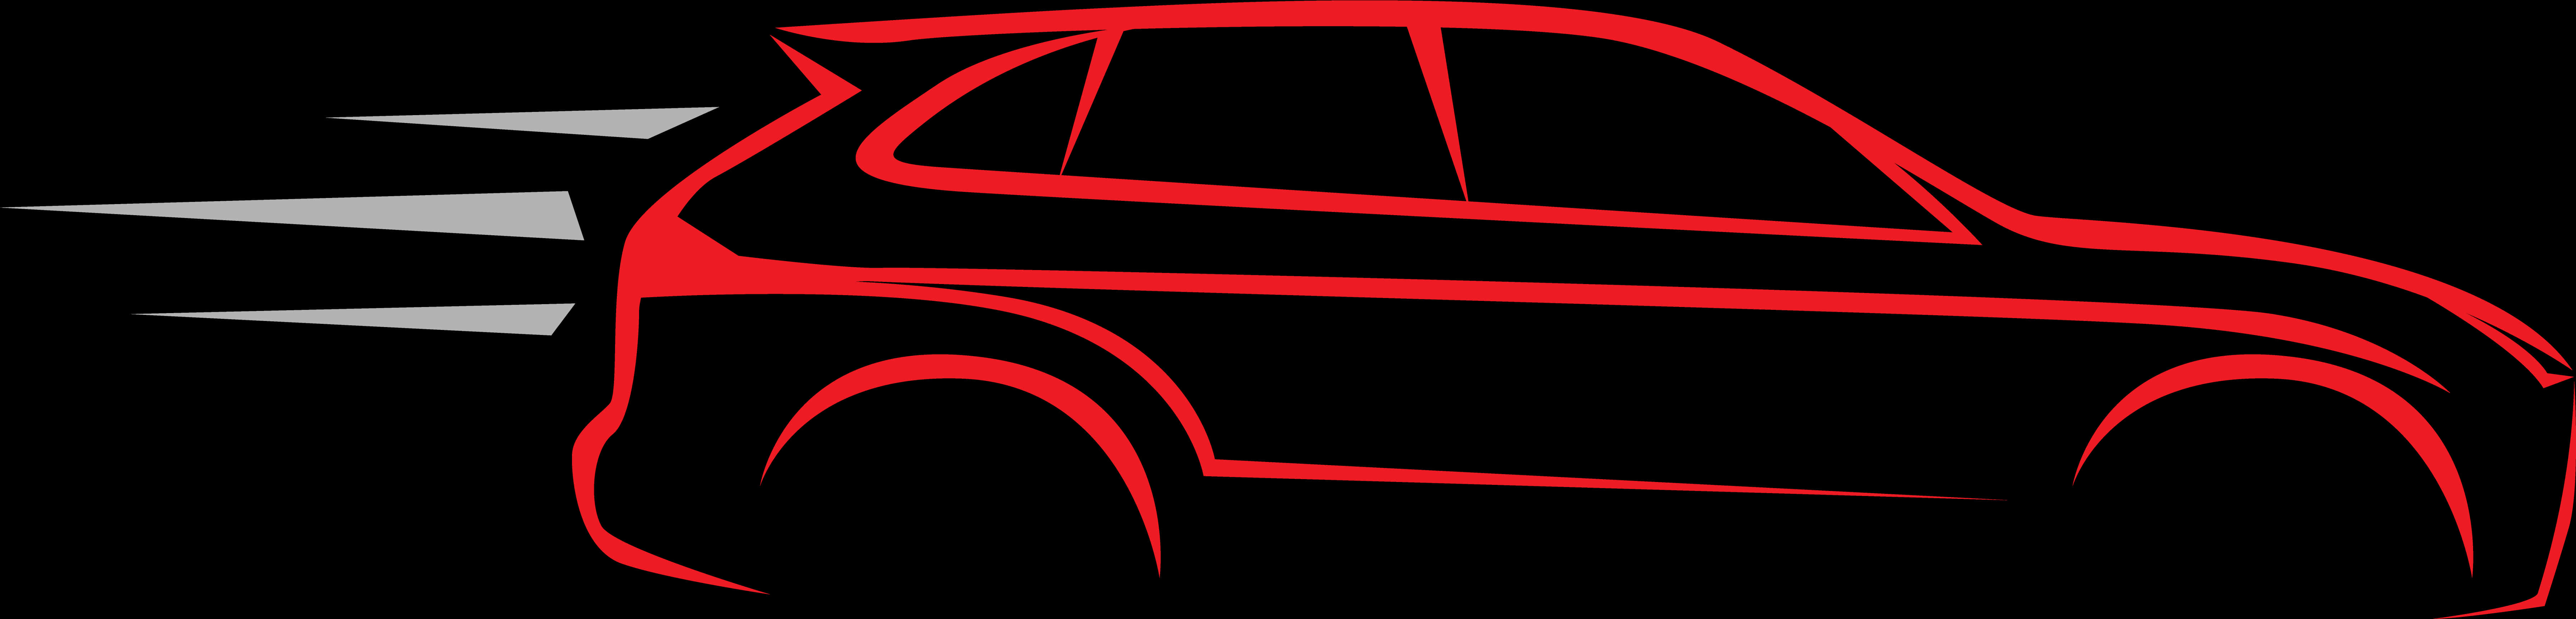 Speeding Car Vector Graphic PNG